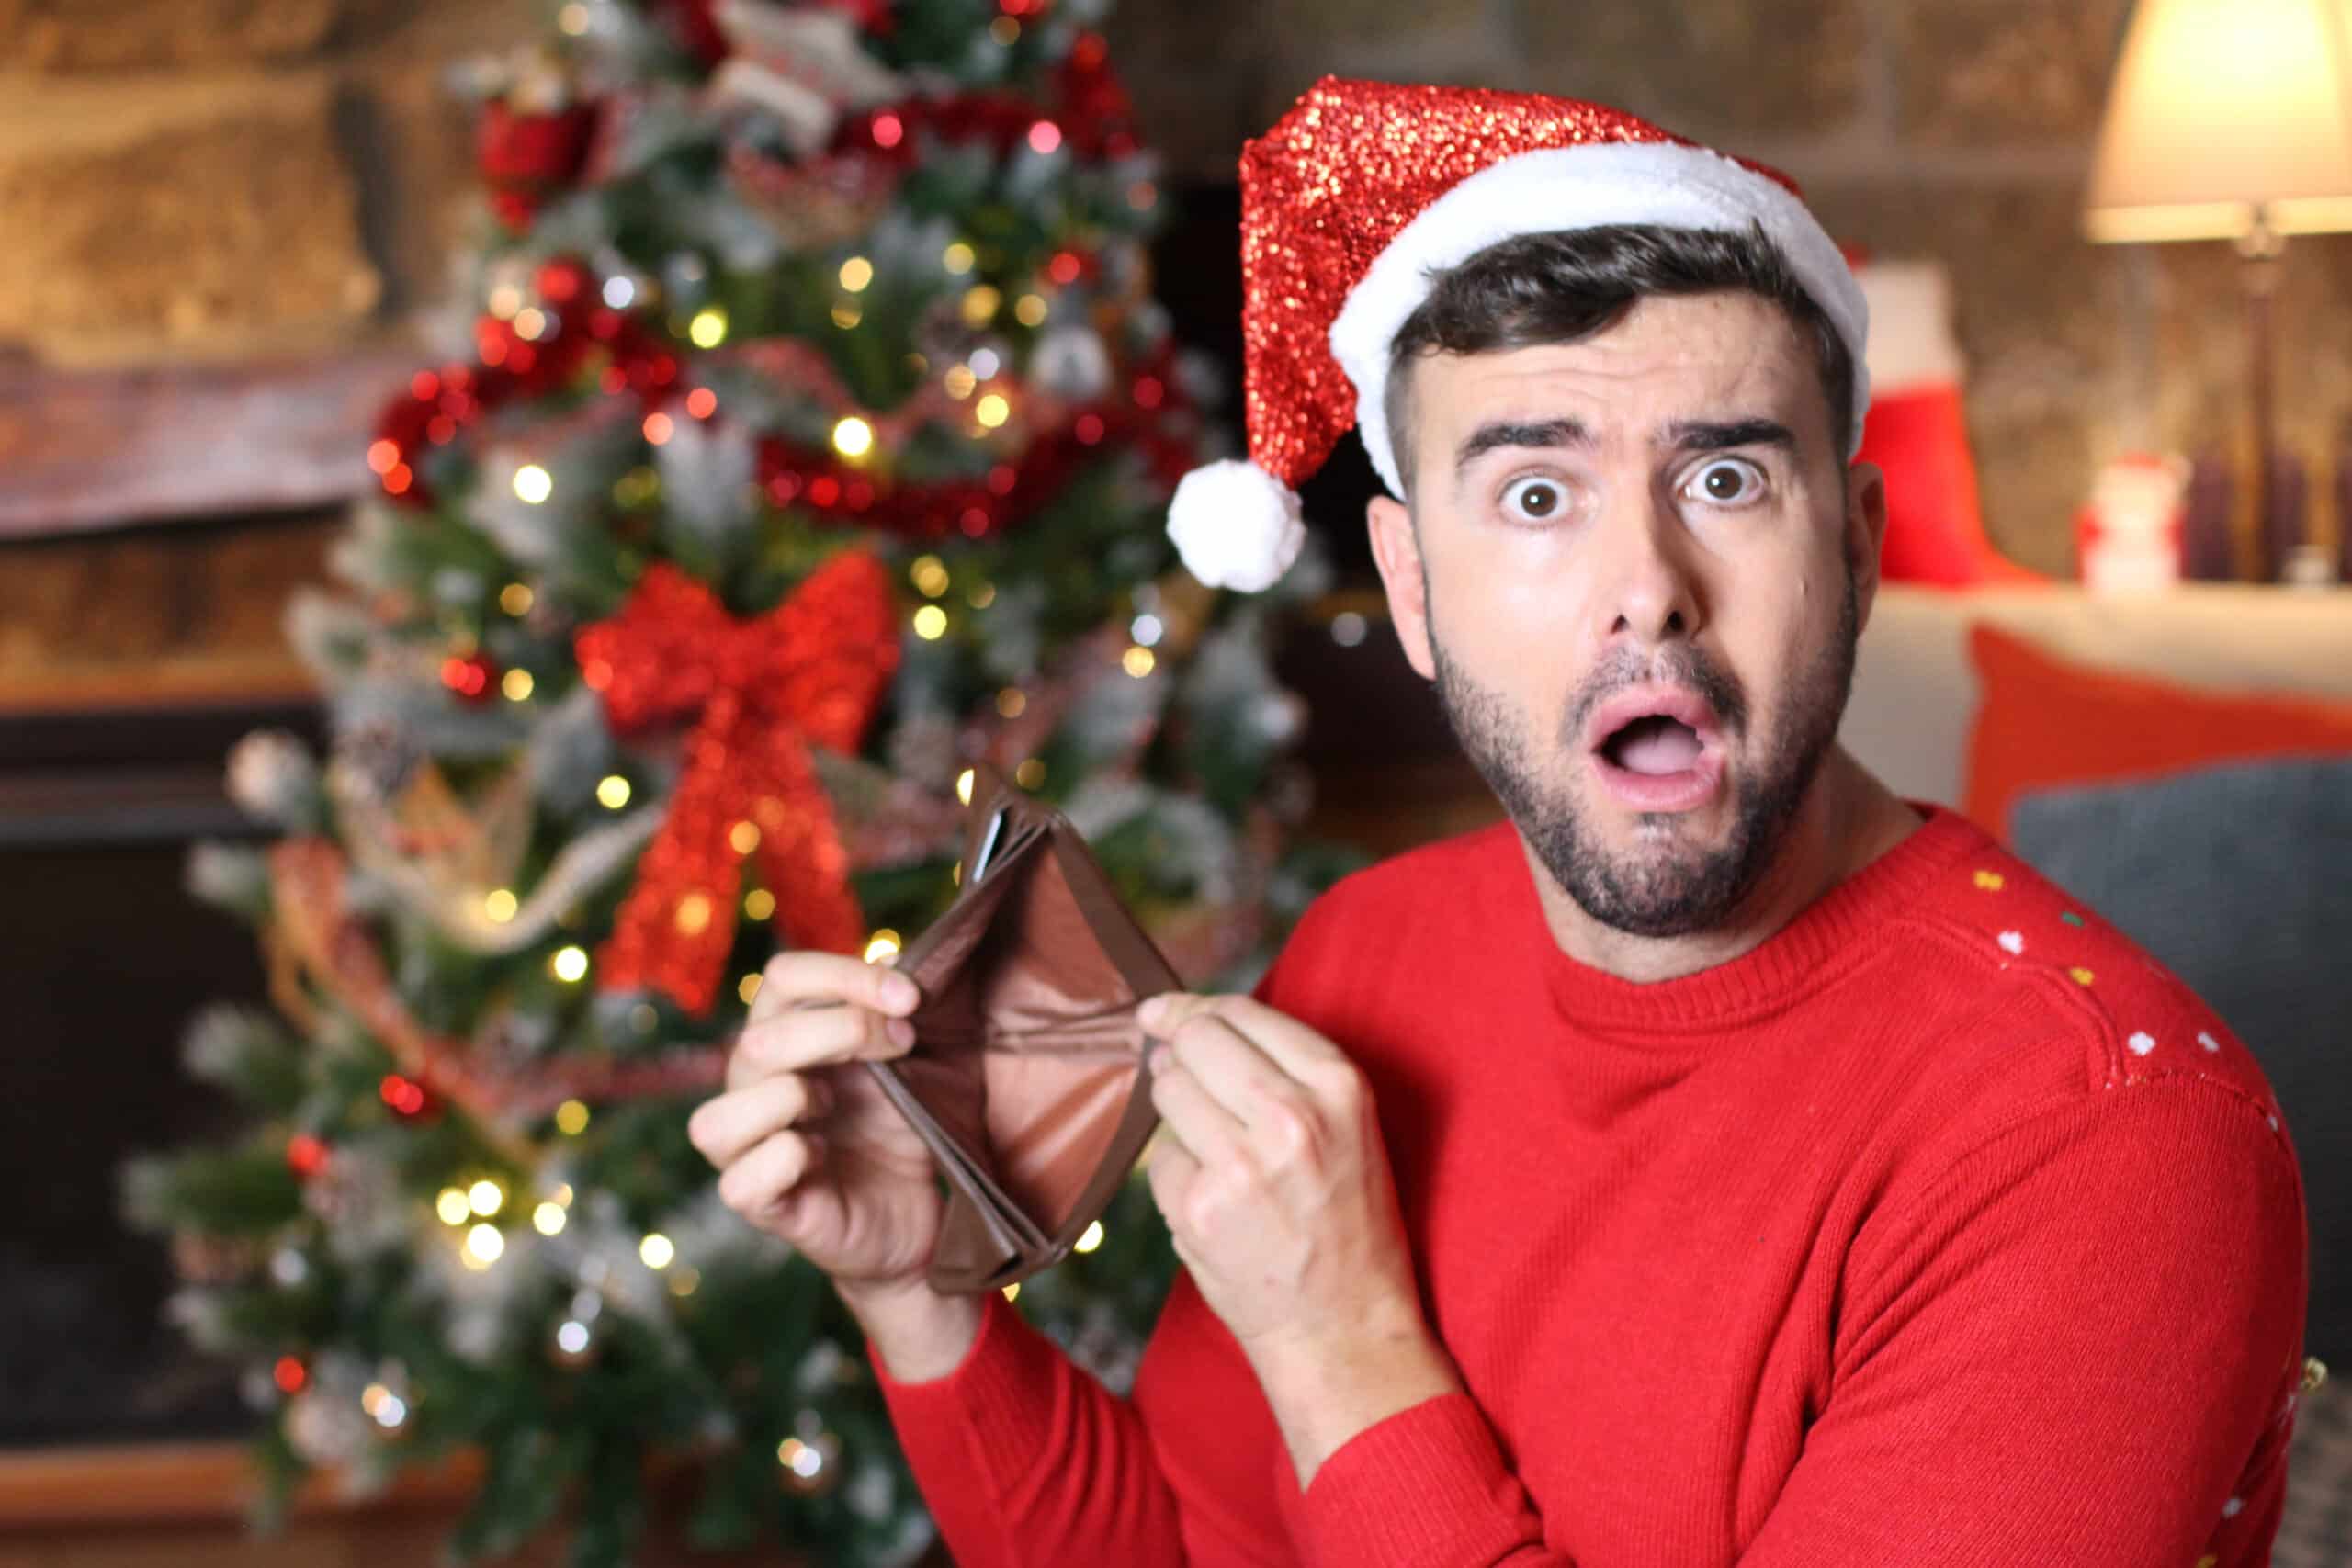 Man in front of holiday decorations showing an empty wallet